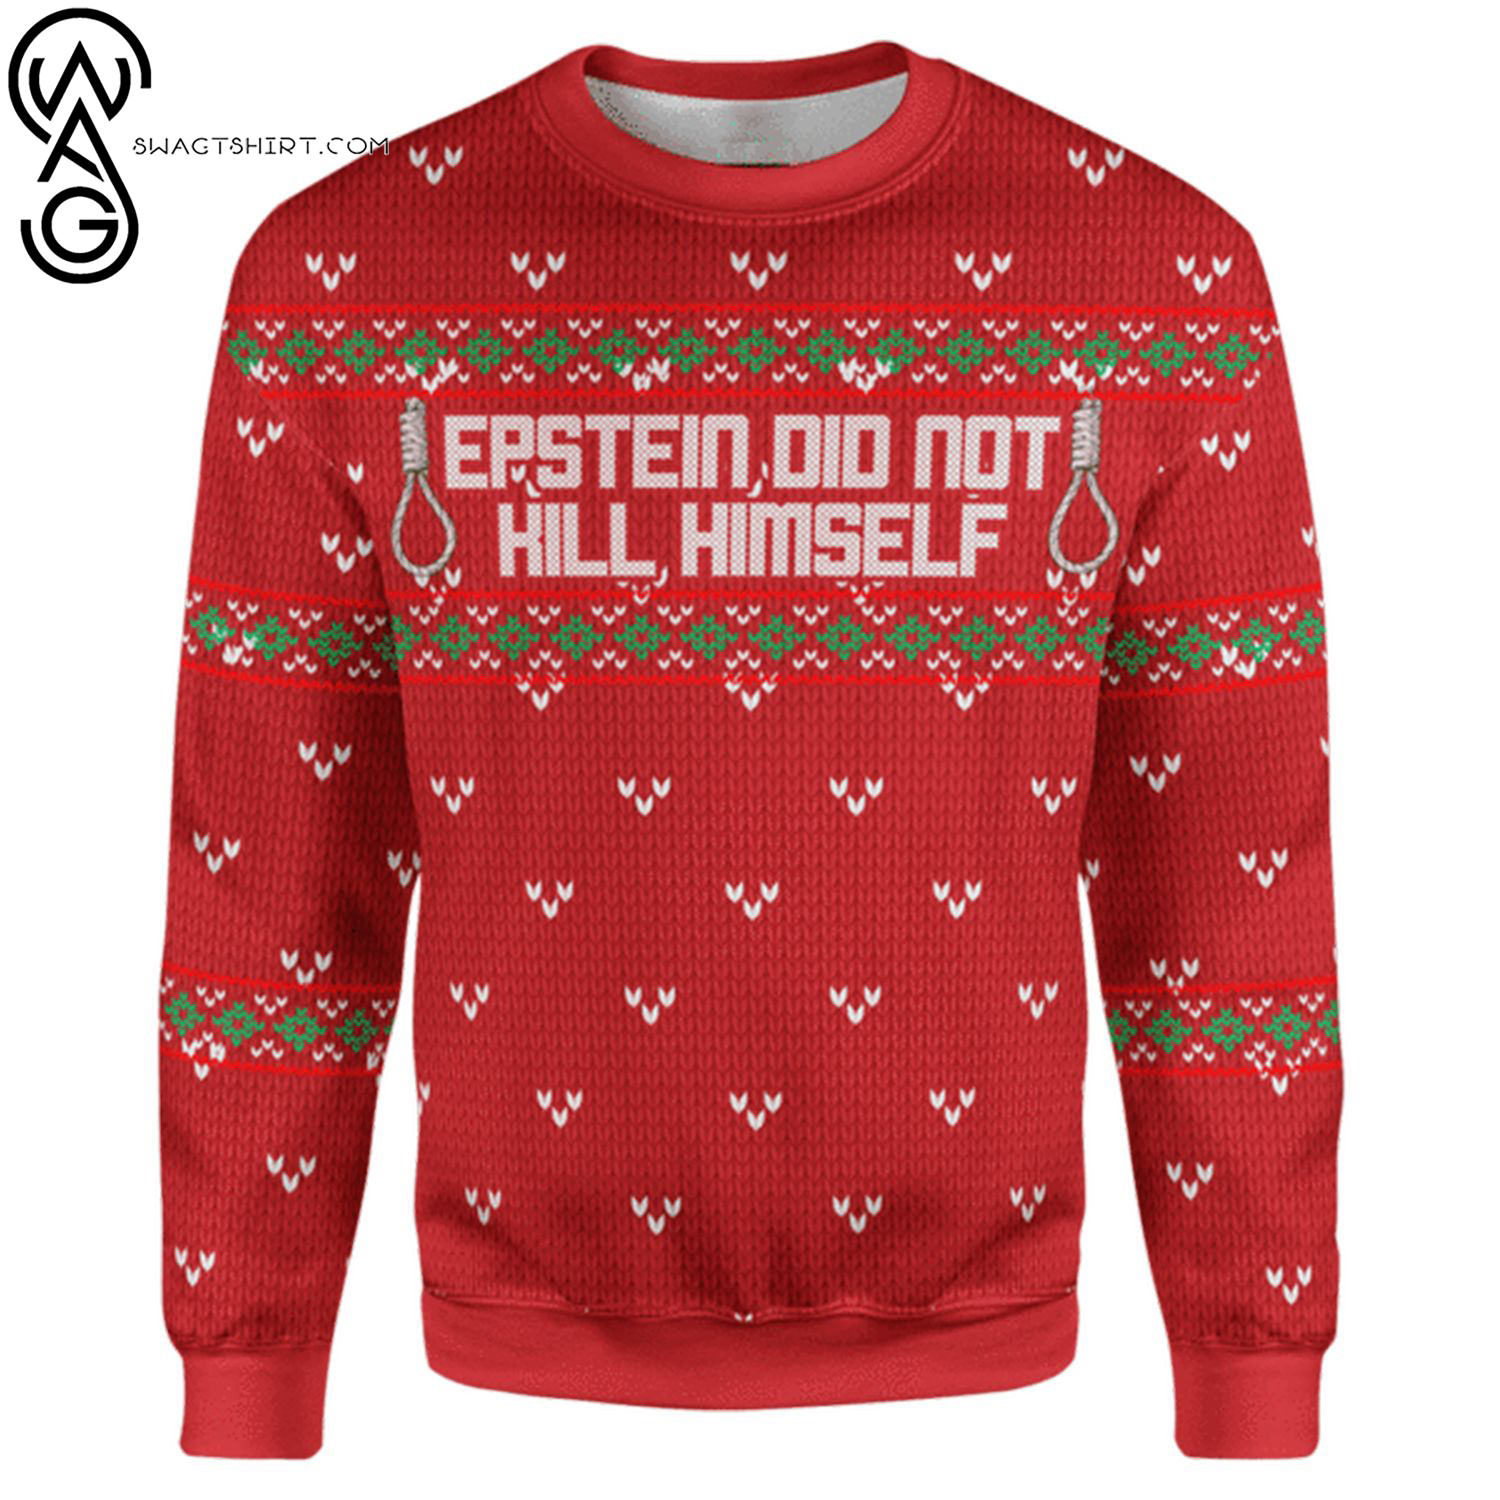 Epstein didn't kill himself full printing ugly christmas sweater